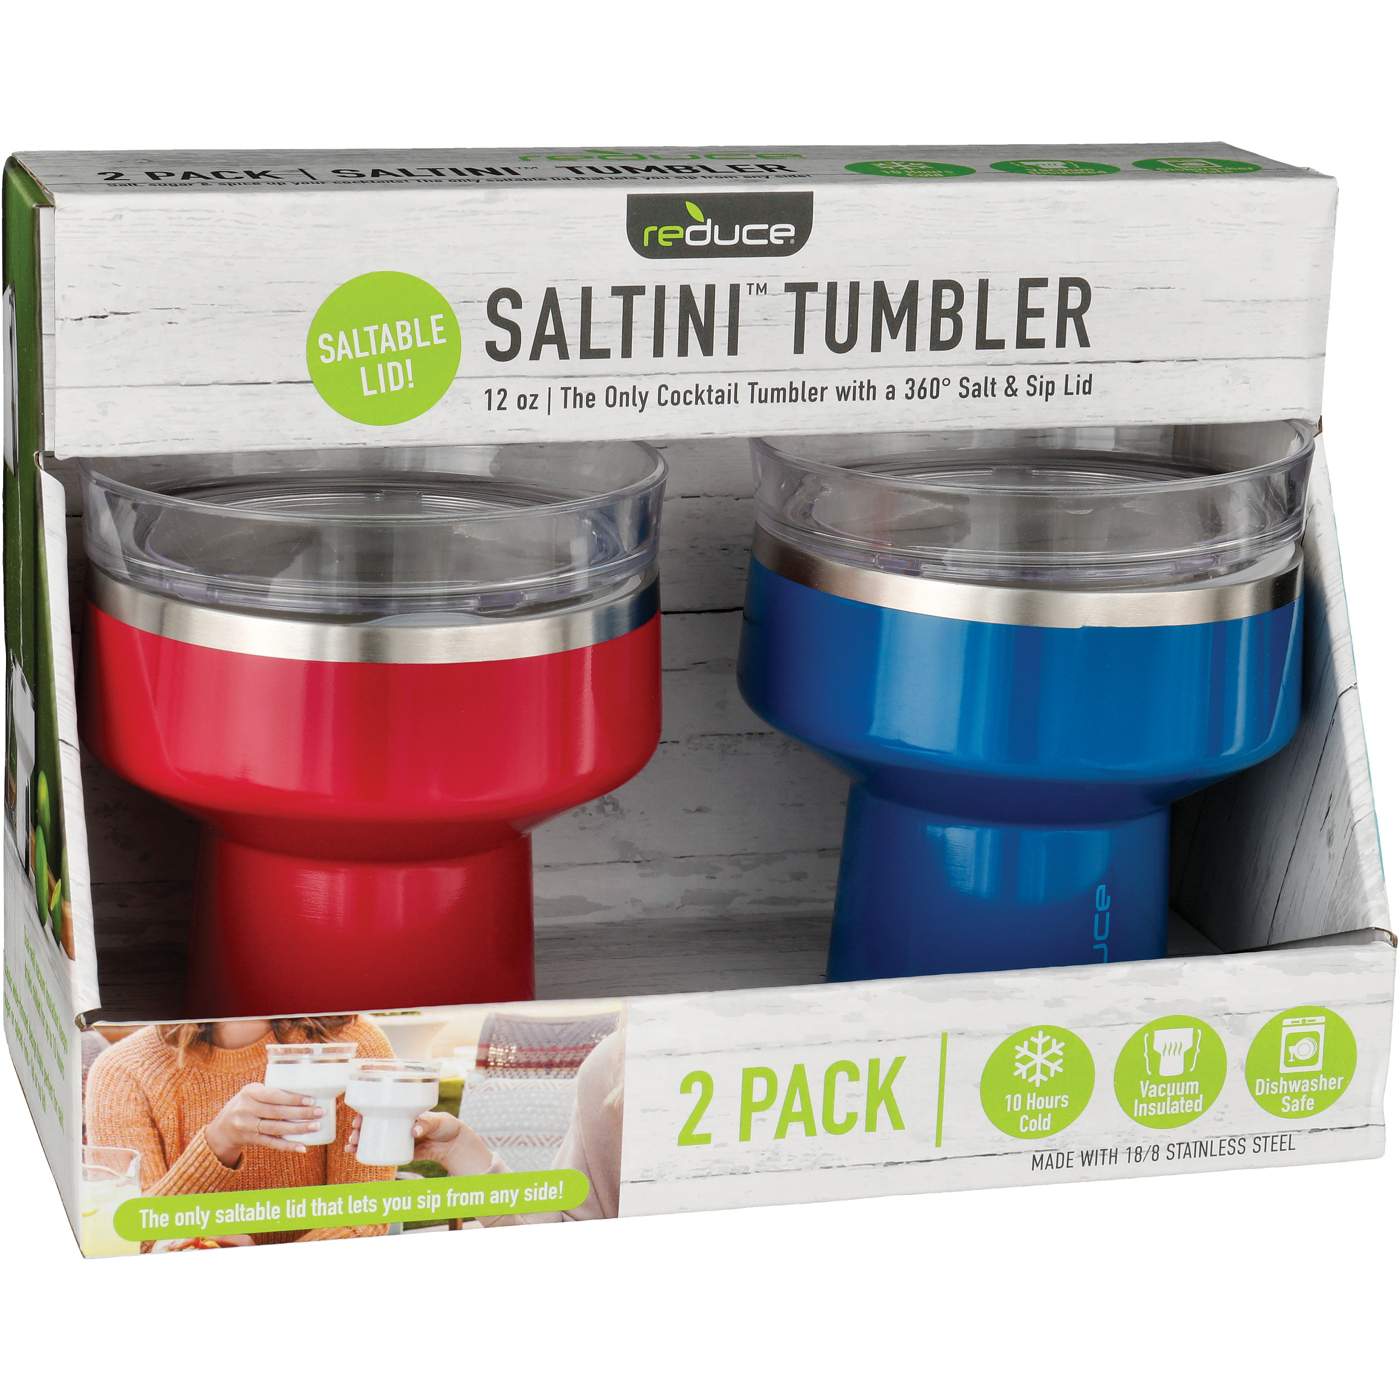 Reduce 2 Vacuum Insulated Stainless Steel Saltini Cocktail